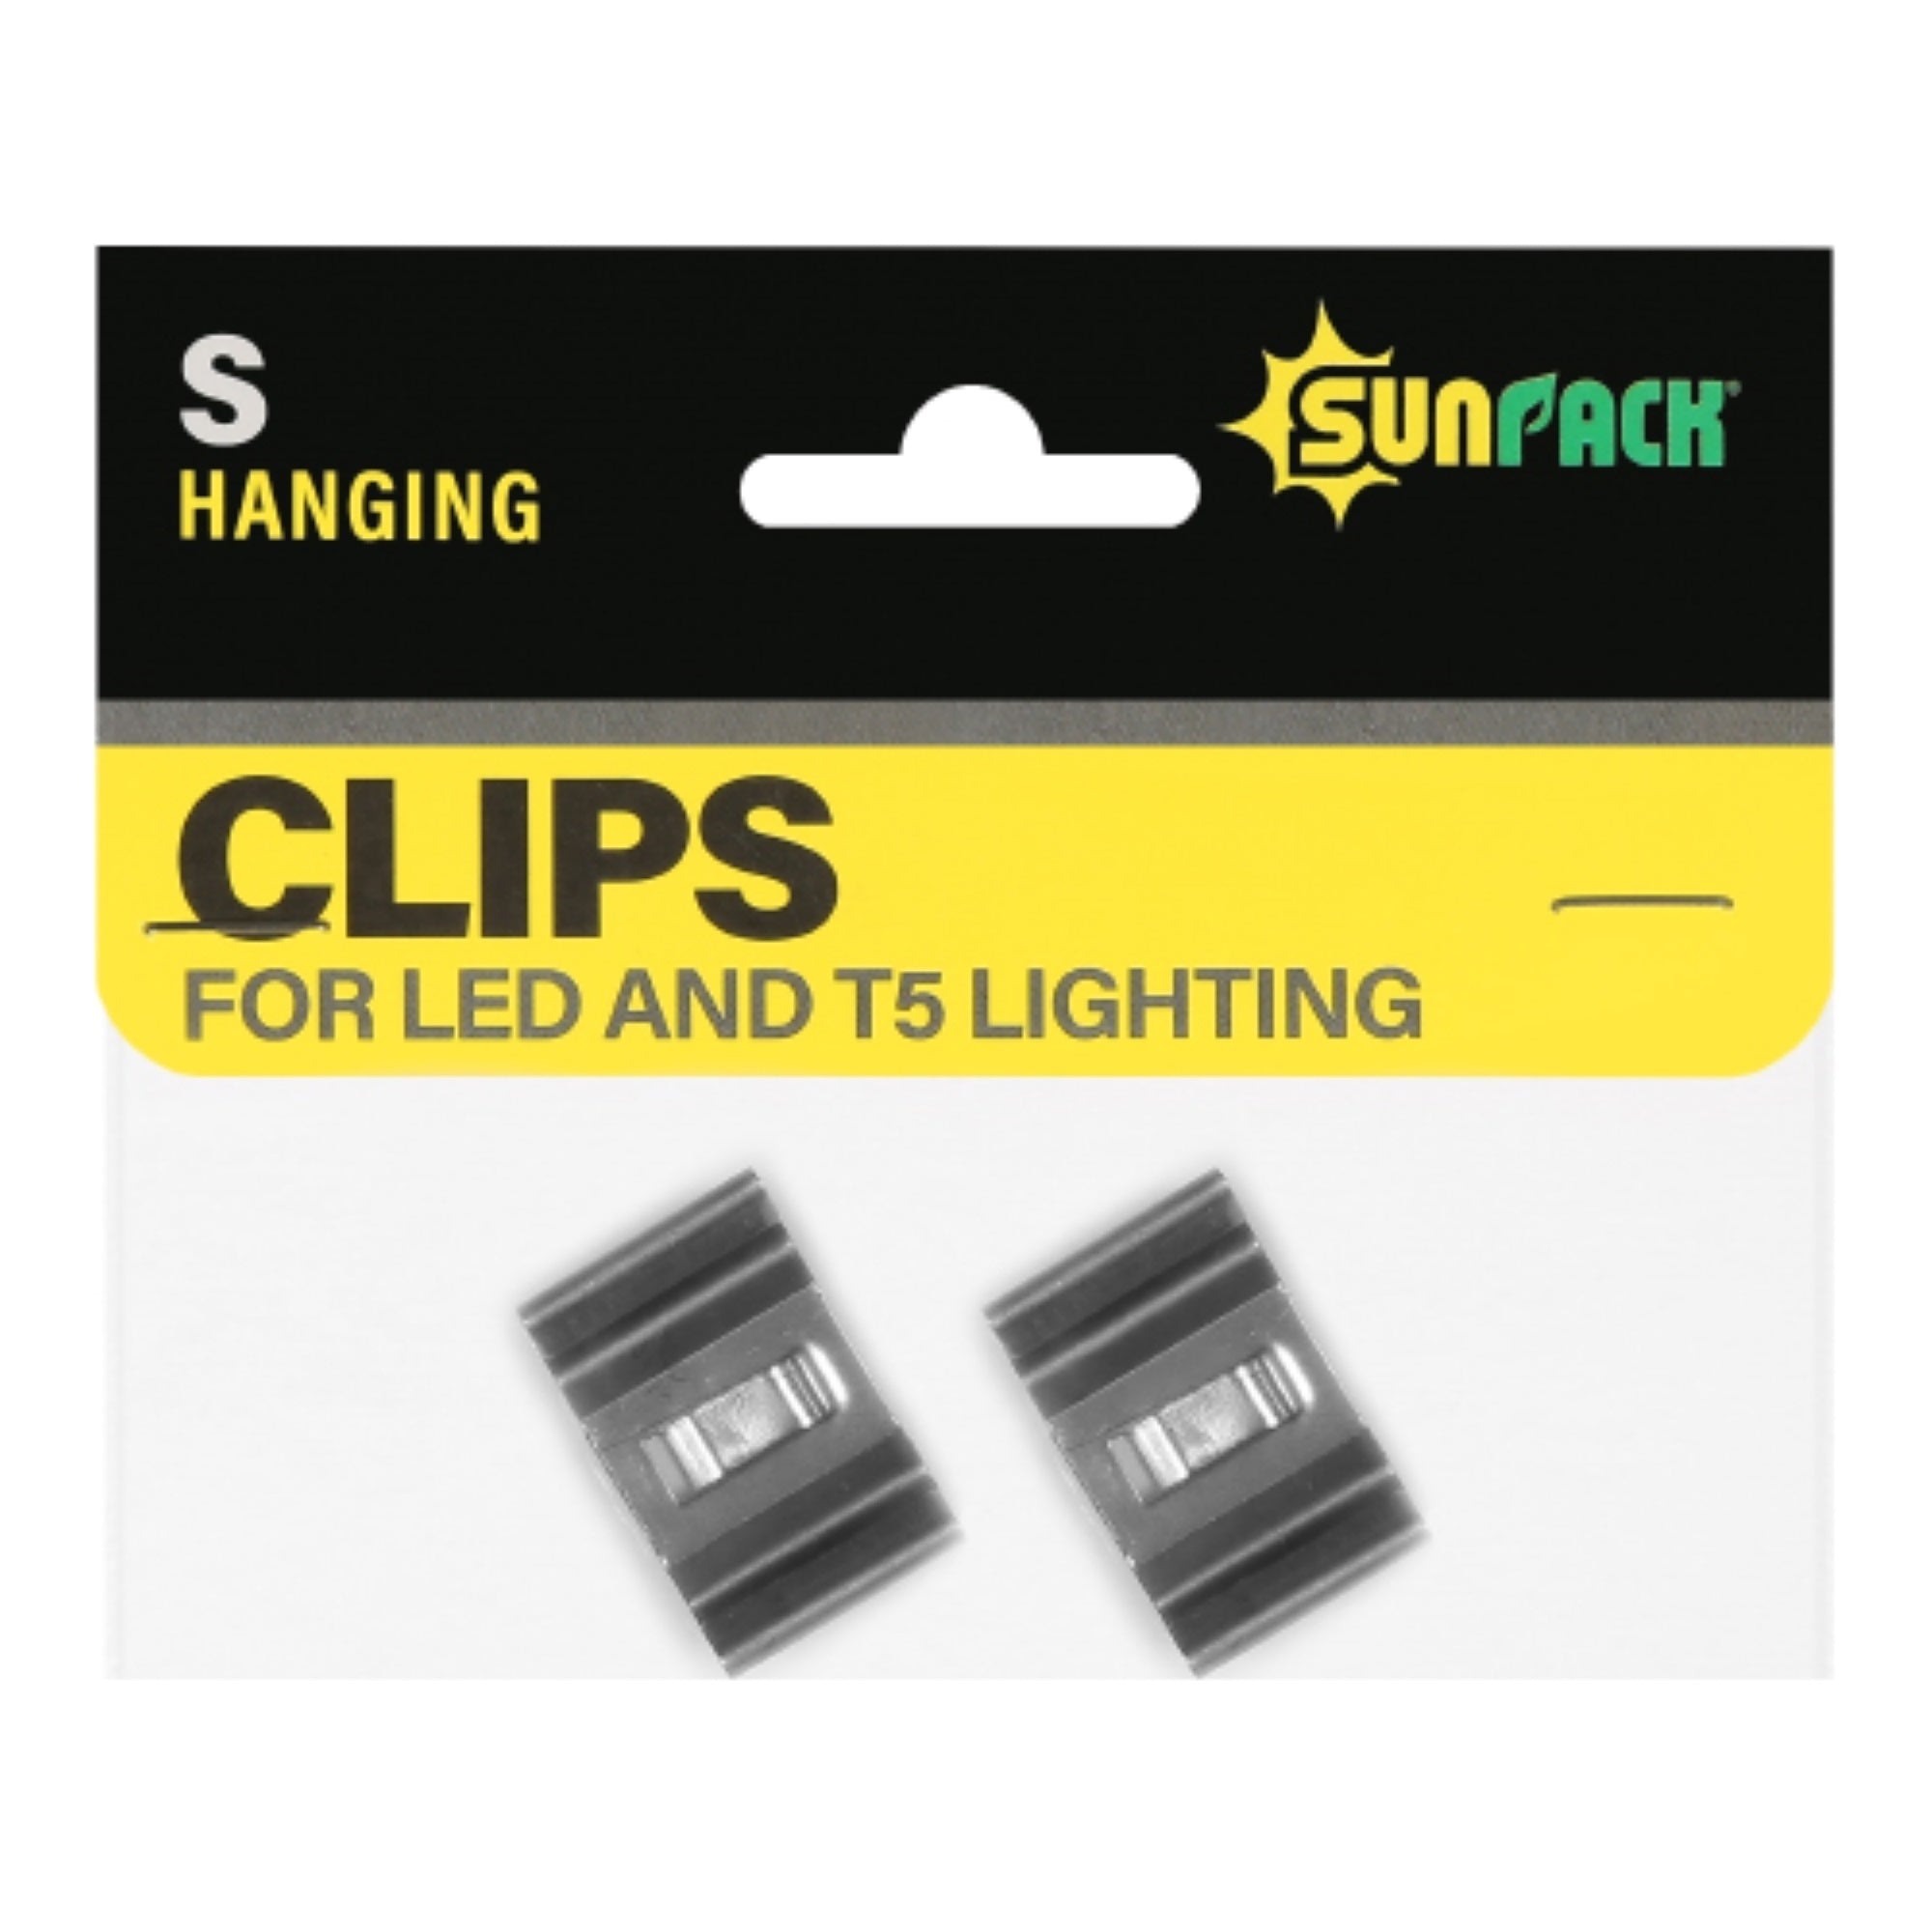 SunPack Hanging Metal S Clips for LED and T5HO Lighting, 2 Clips Per Pack